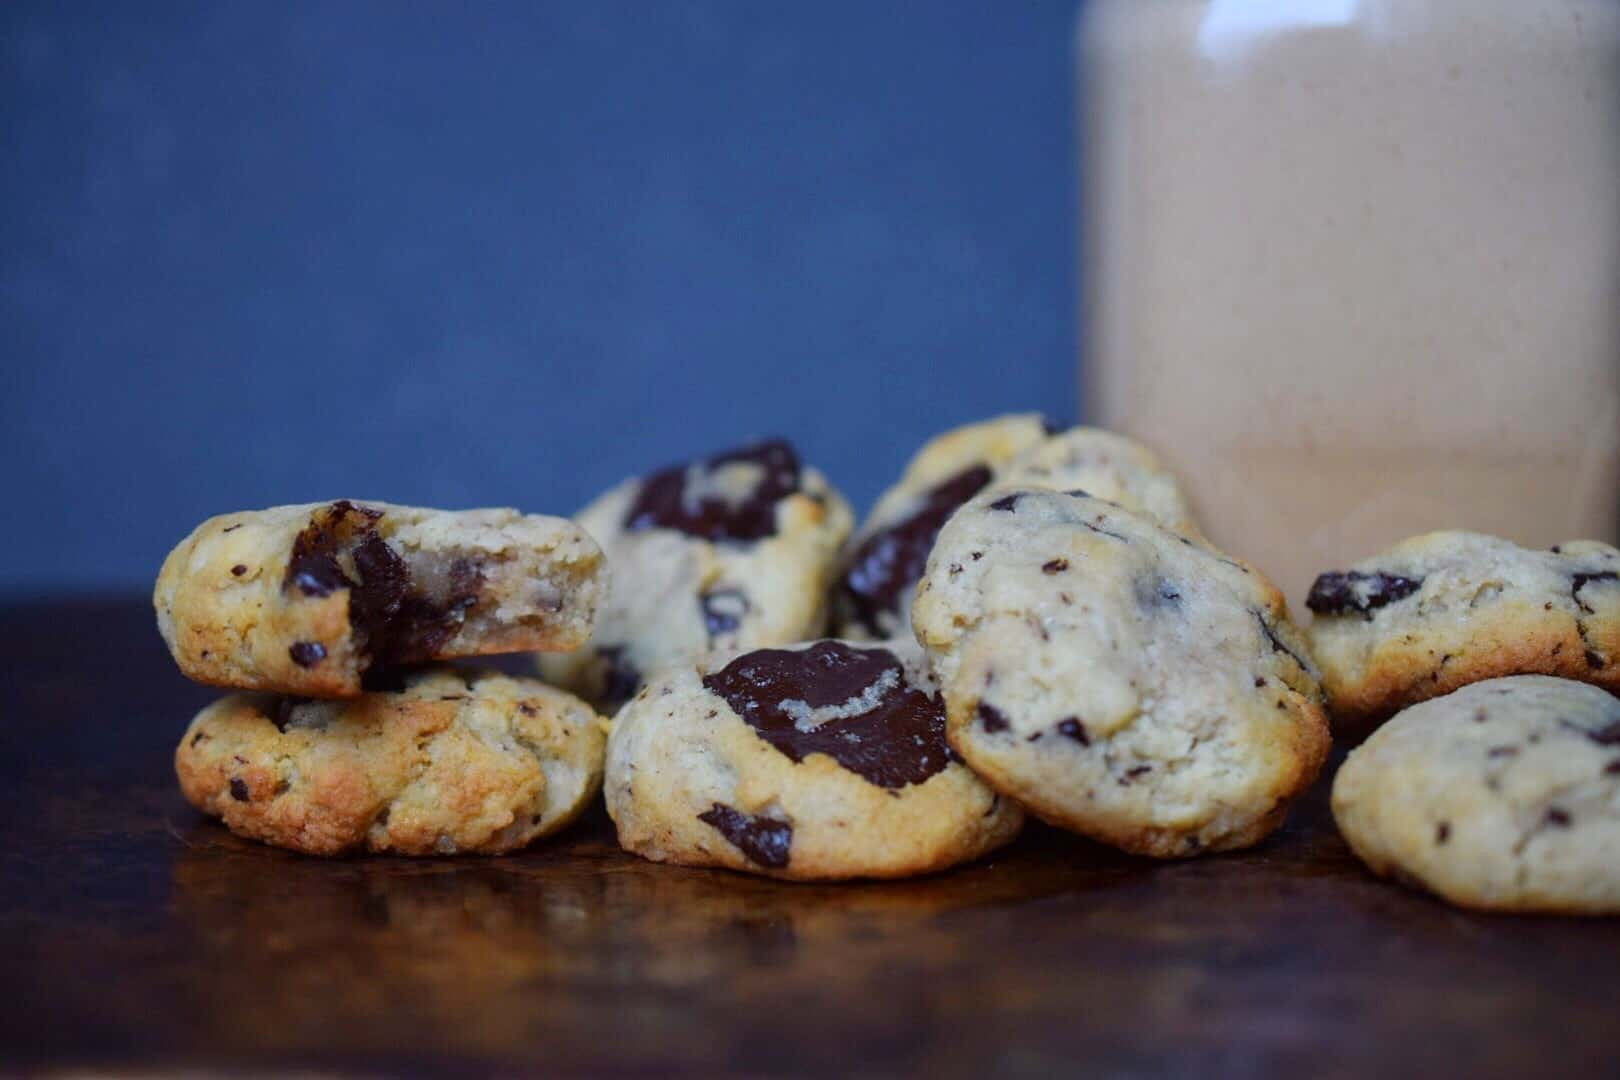 Chewy Keto Chocolate Chip Cookies
 Chocolate Chip Keto Cookies CHEWY Paleo Dairy Free